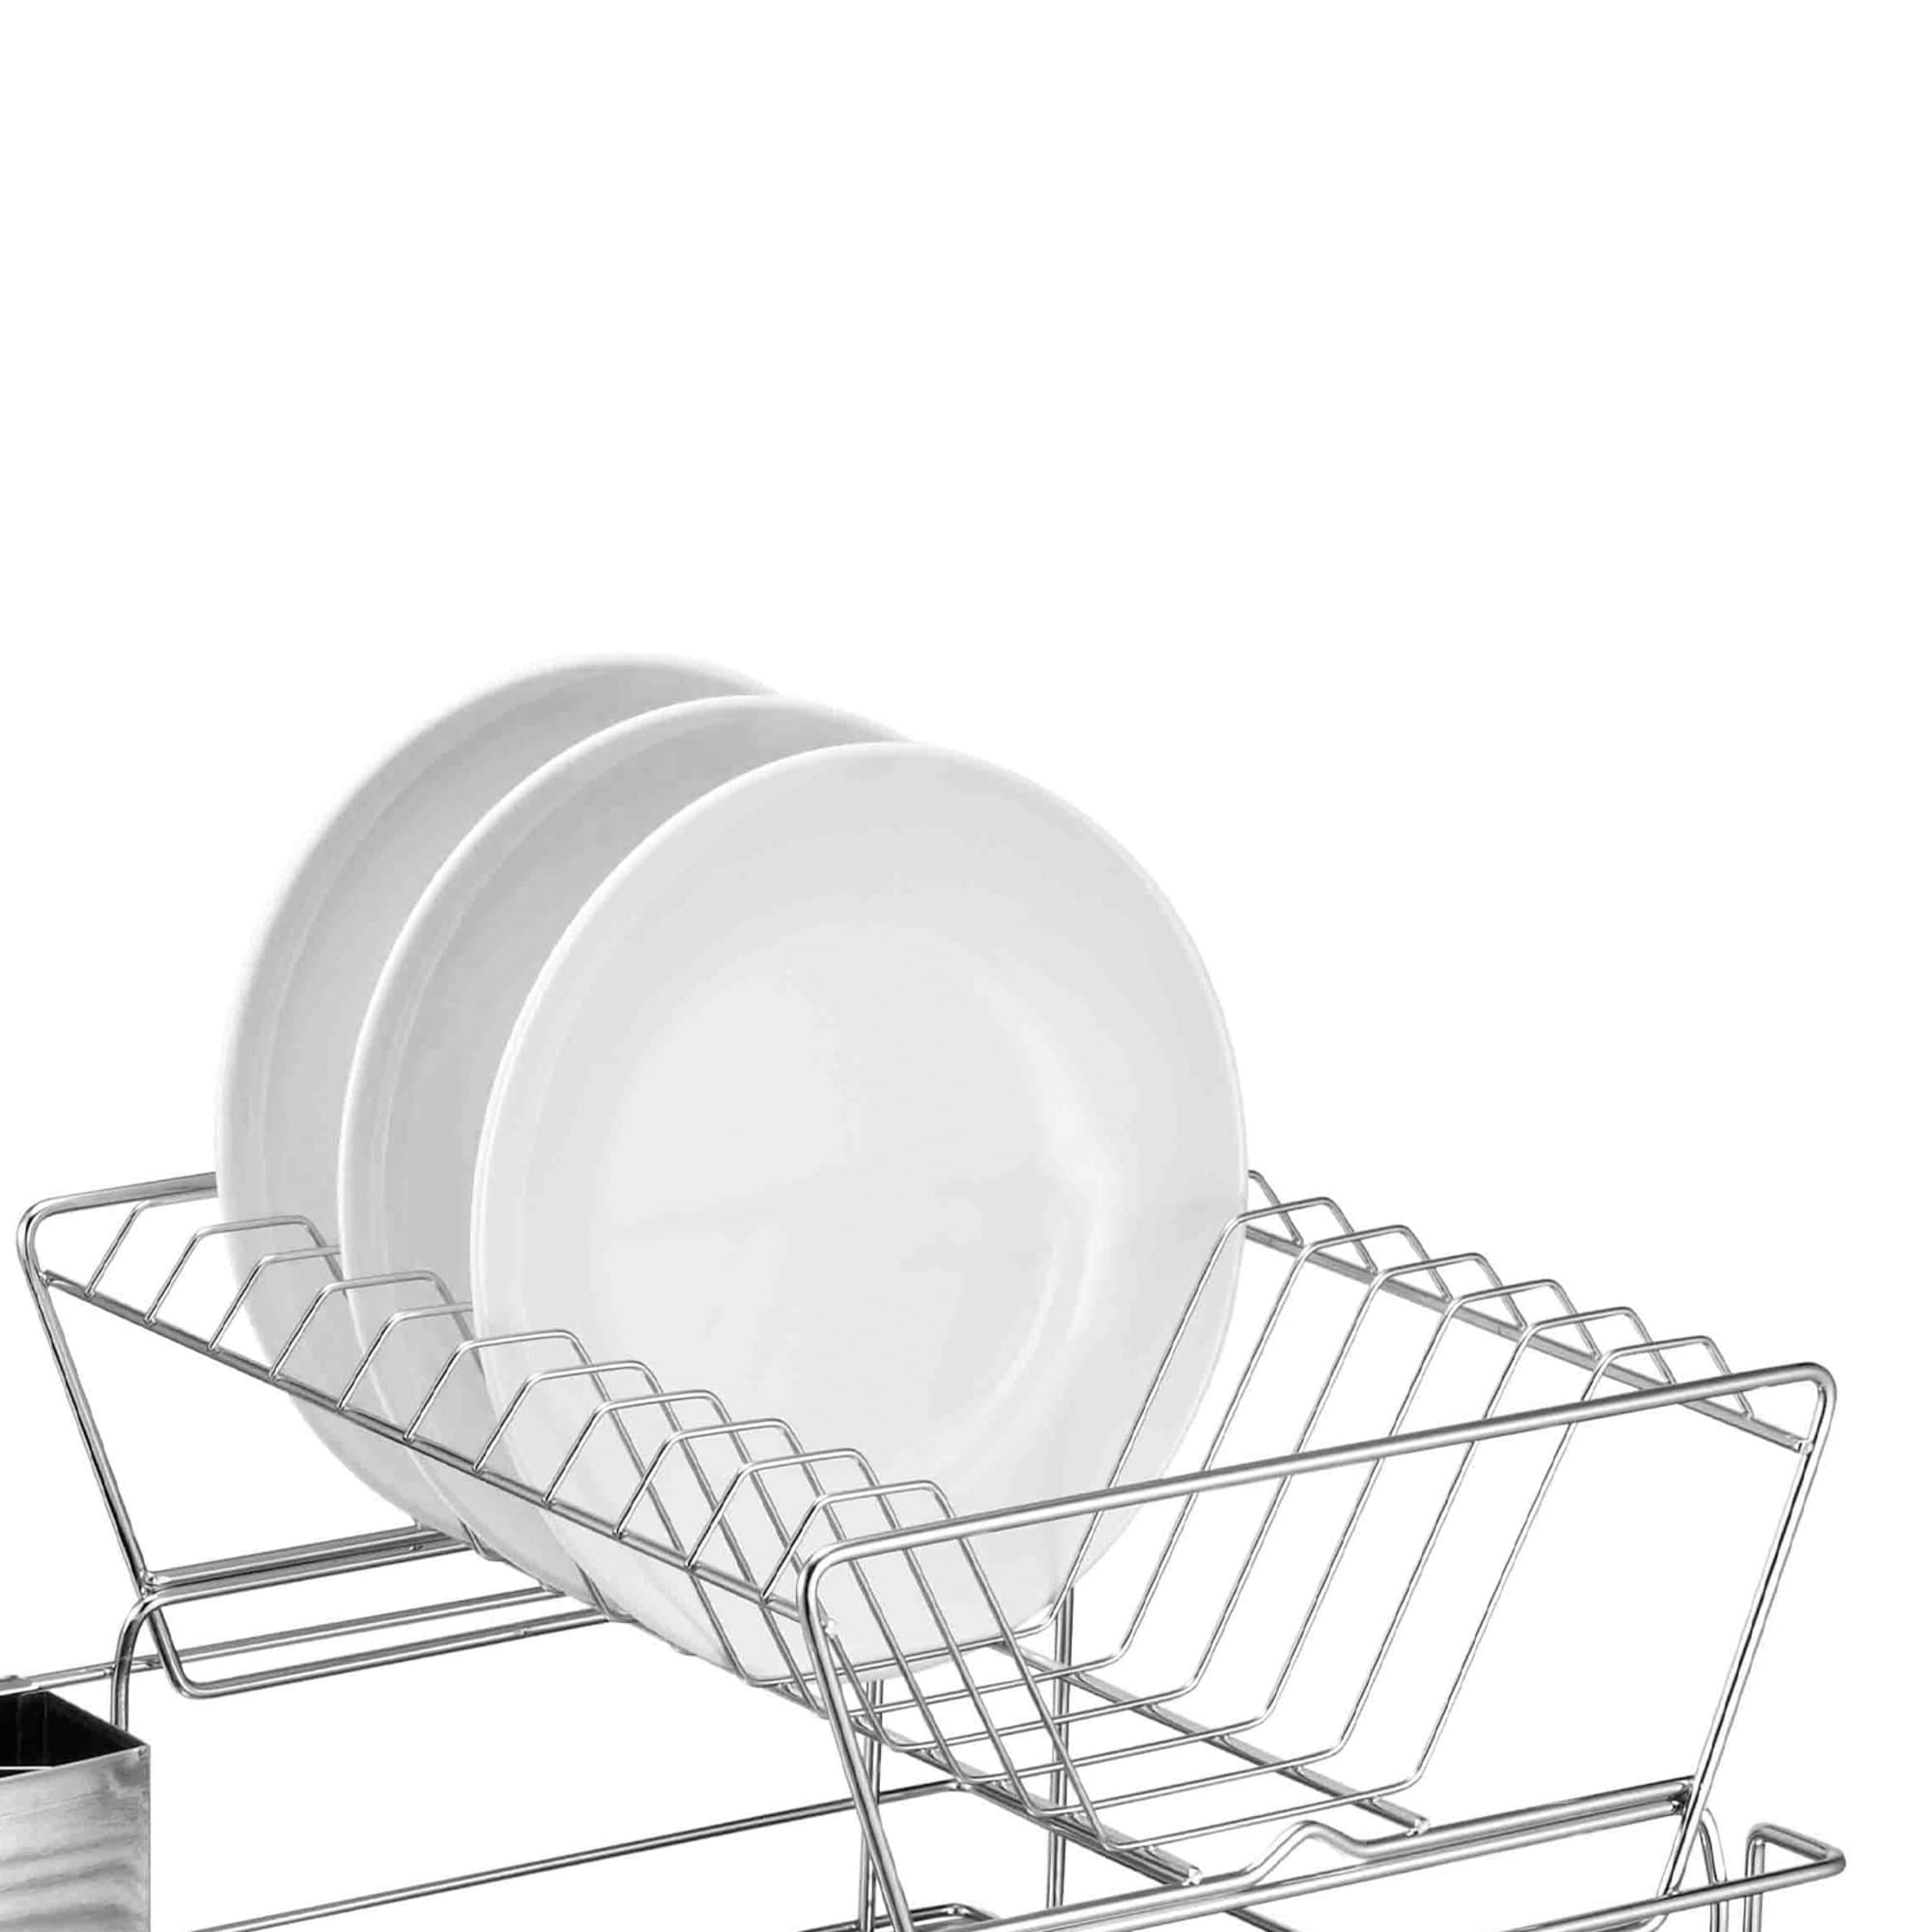 Home Basics 2-Tier 3 Piece Steel Dish Drainer $30.00 EACH, CASE PACK OF 6